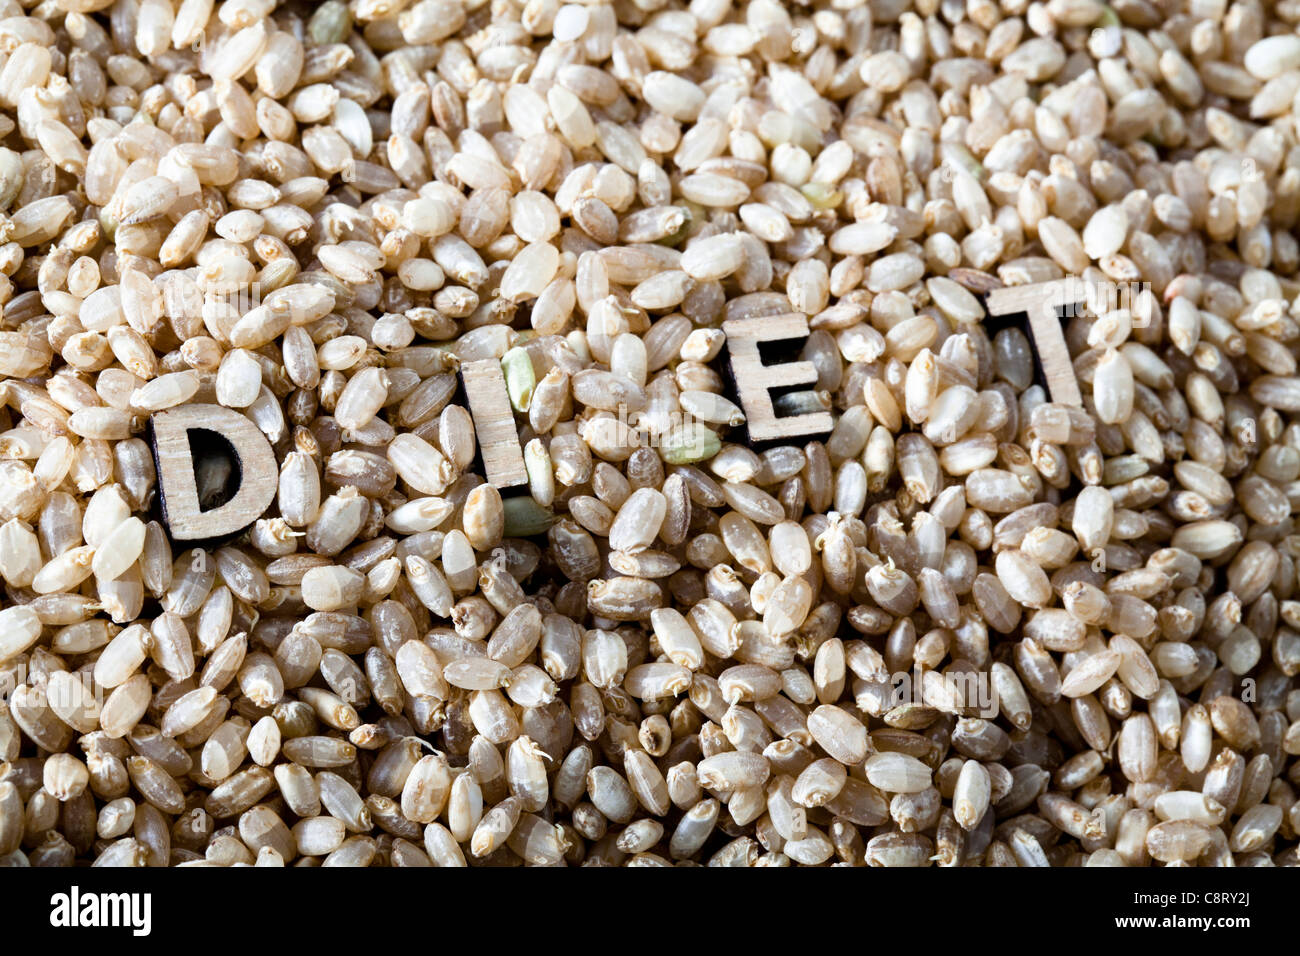 Close-up of text on dried food Stock Photo